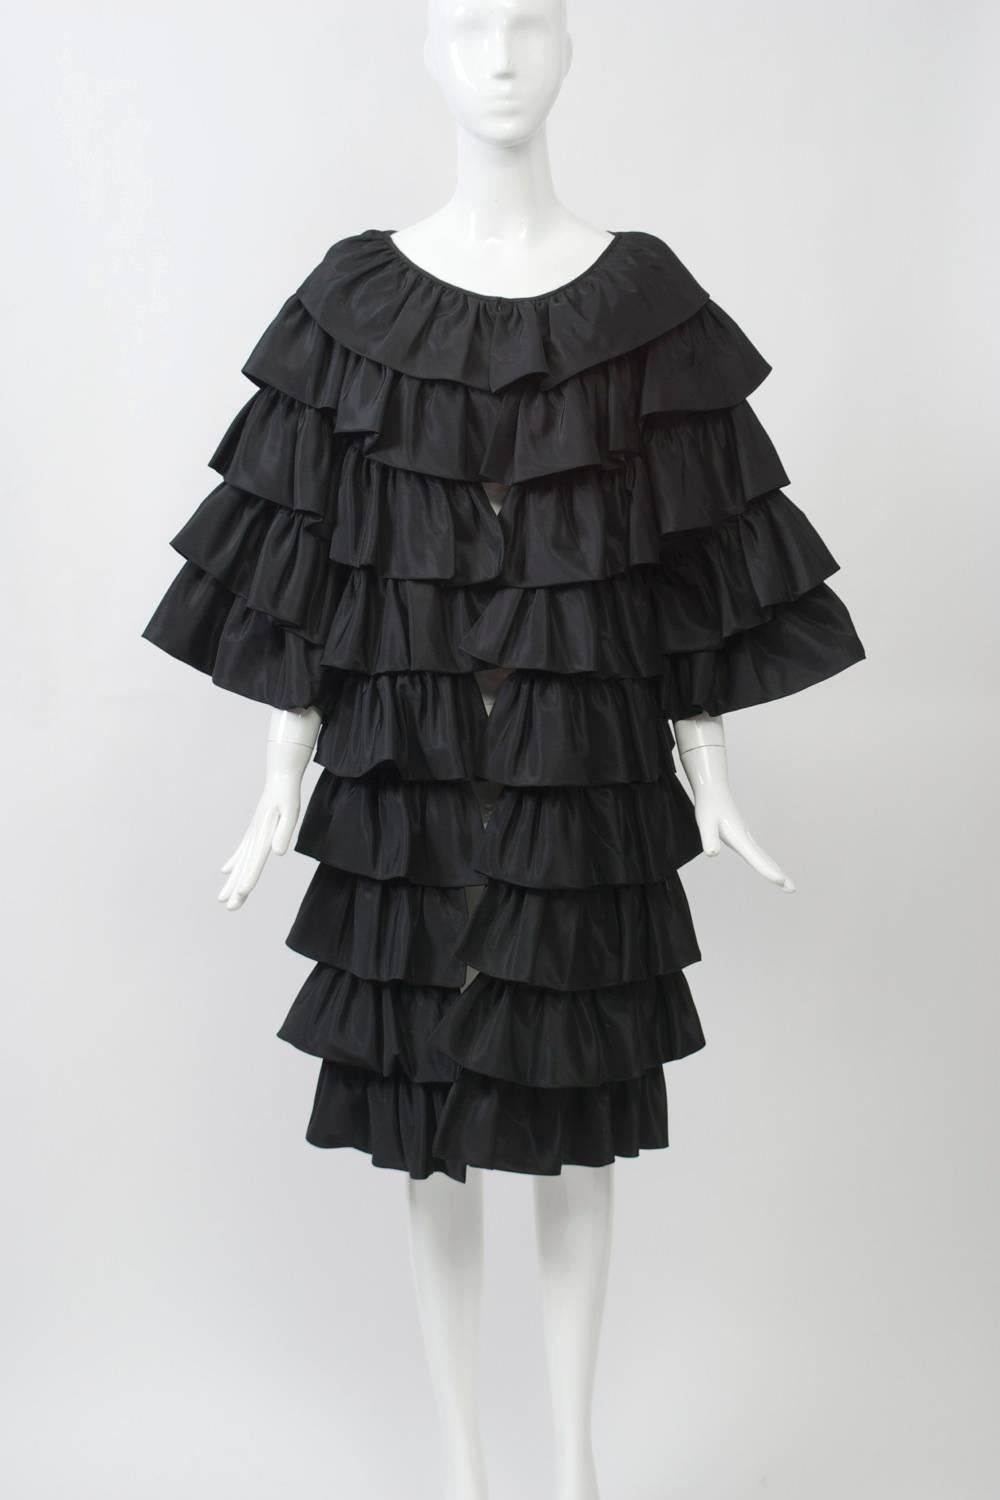 Evening coat by Victor Costa constructed of overlapping rows of black taffeta. Wide elbow-length sleeves, hook closures at front. Approximate size 6-8.